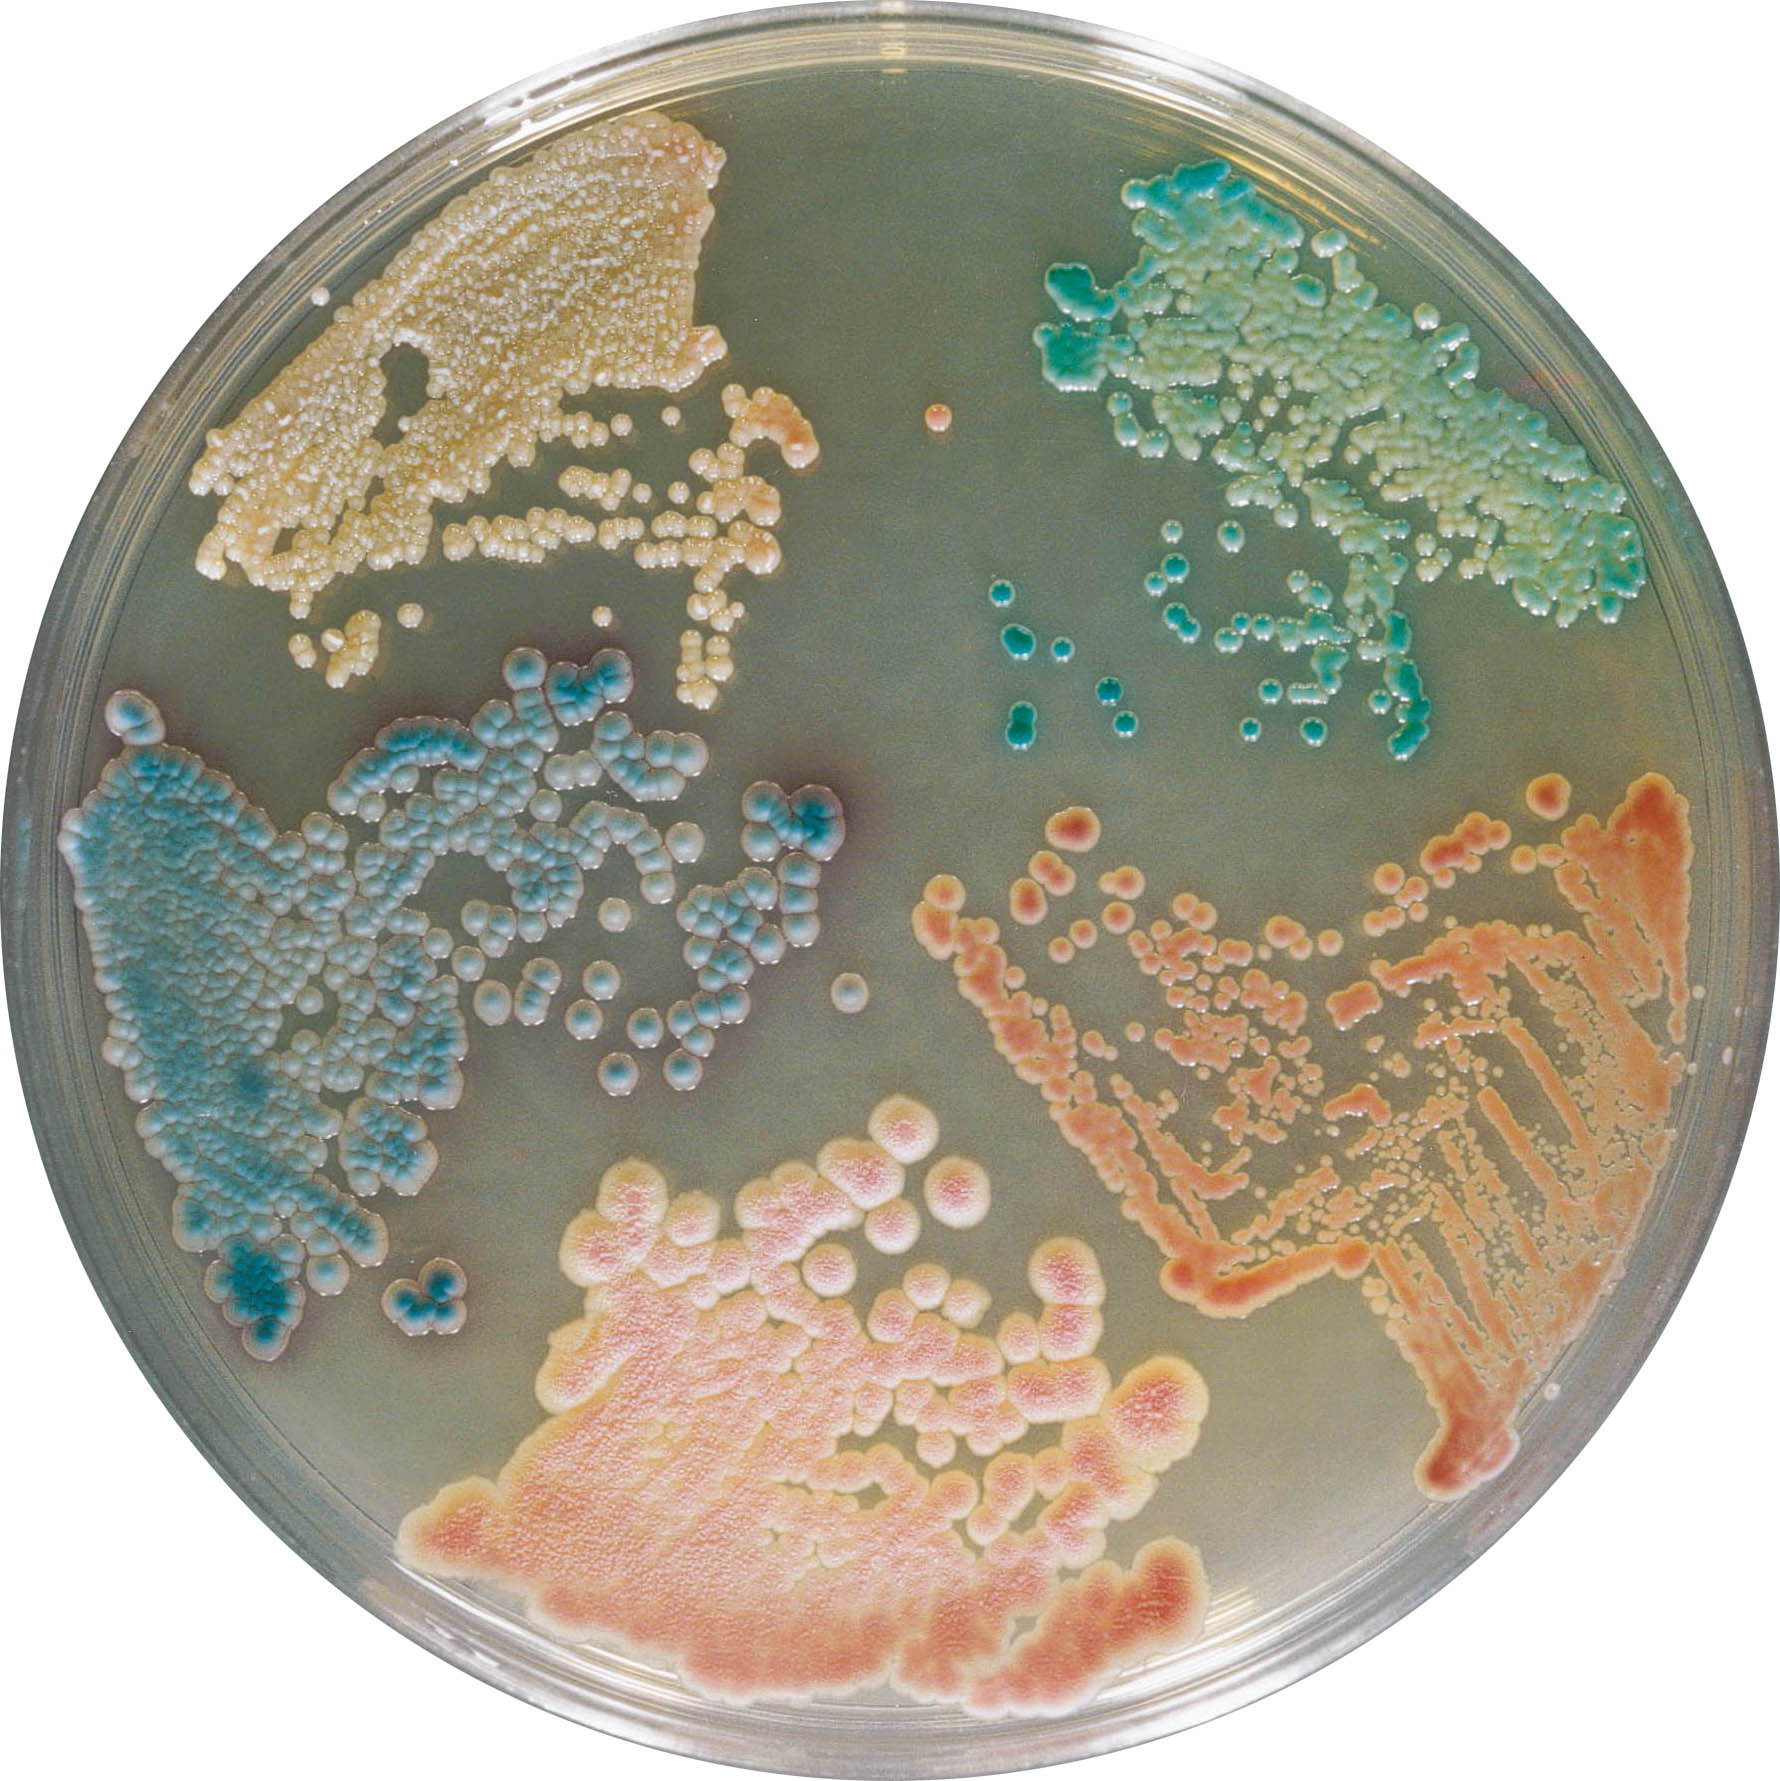 Photo of a sample of different types of bacteria